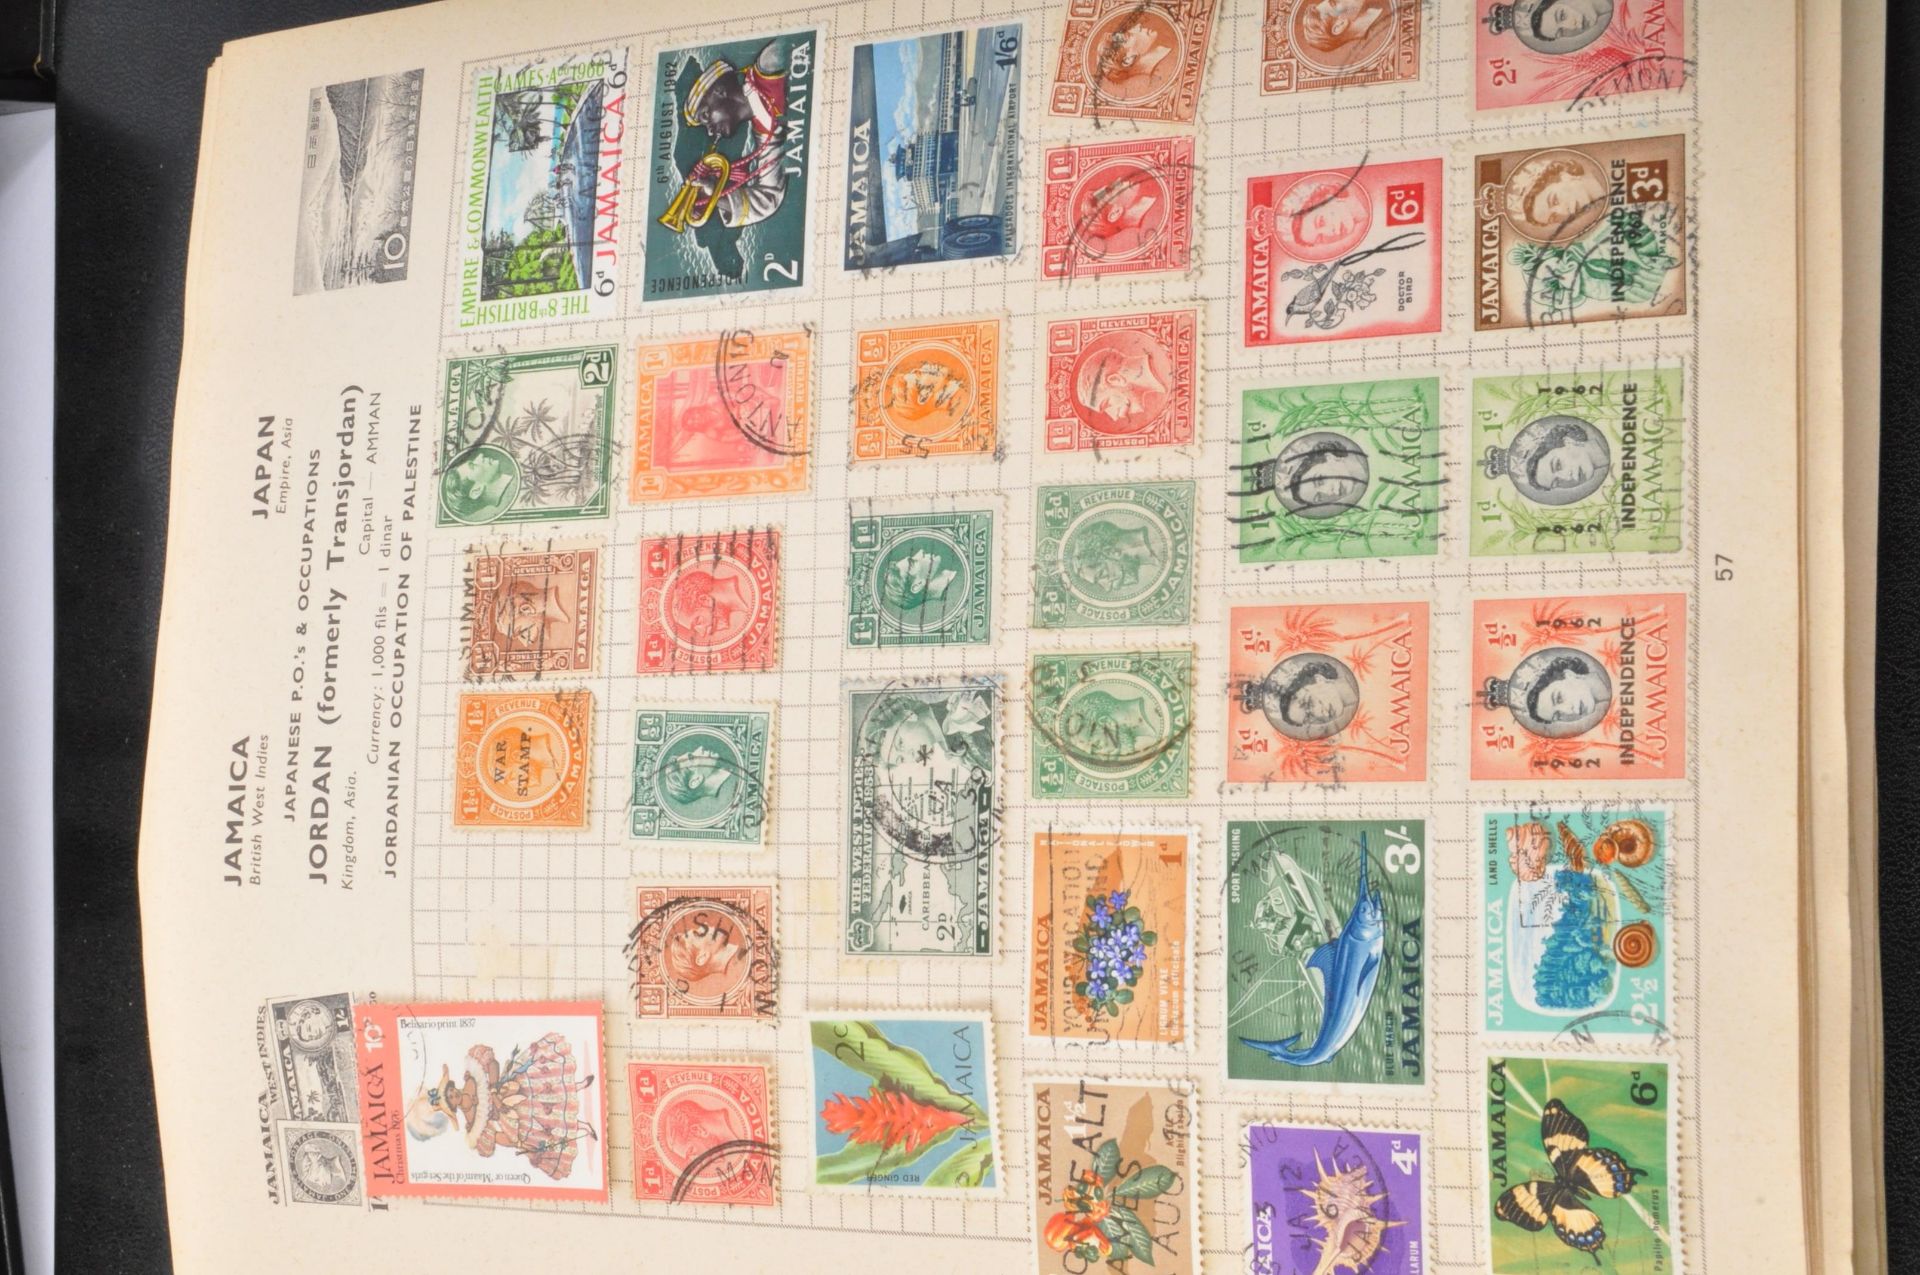 LARGE COLLECTION OF VINTAGE UK & FOREIGN STAMPS ALBUMS - Image 3 of 6